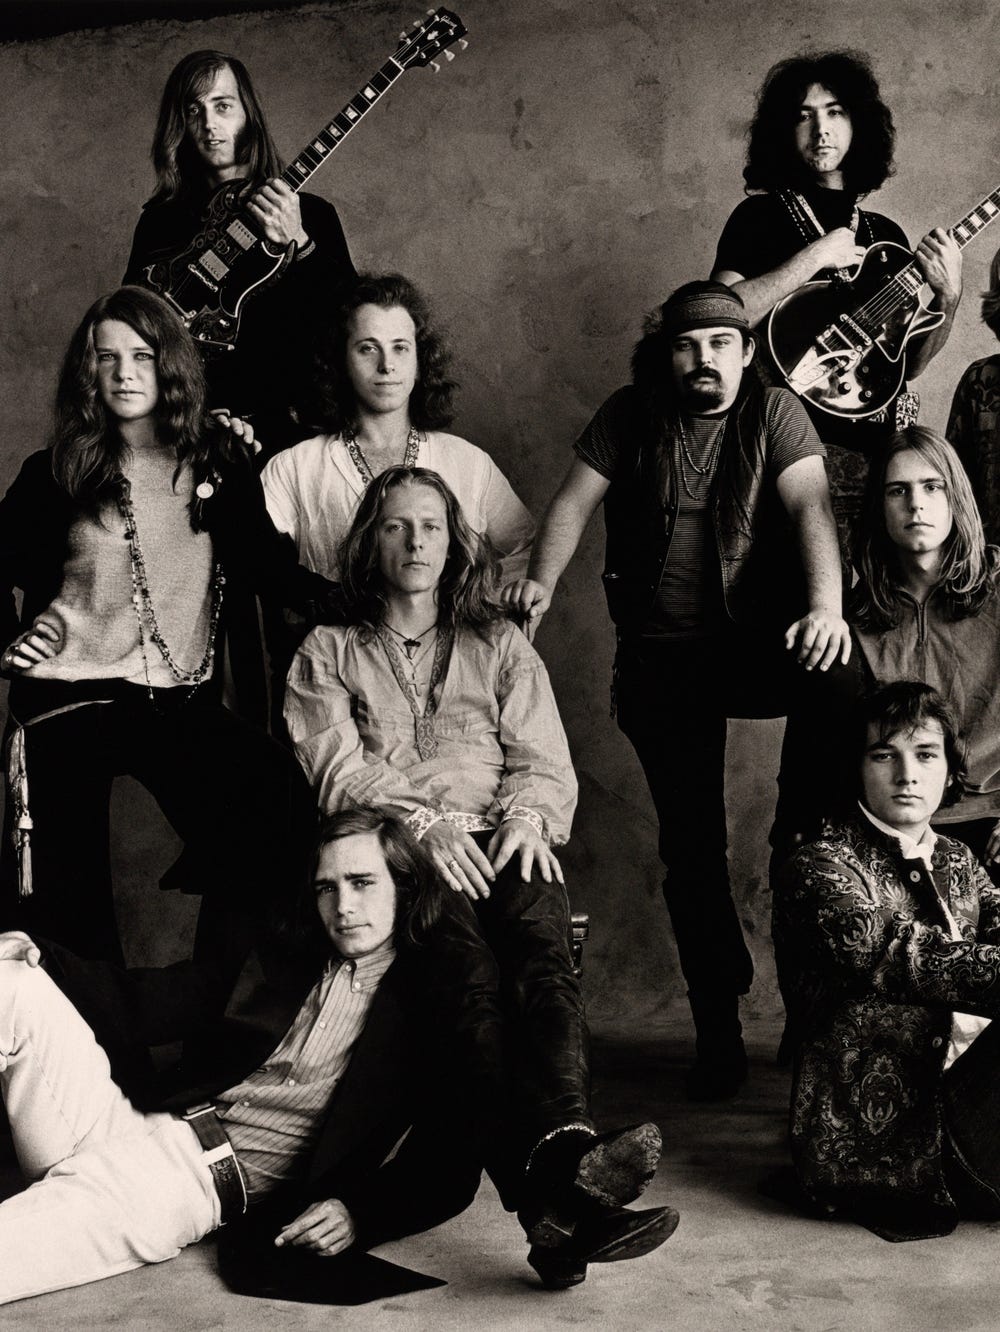 Rock groups posing for a portrait by Irving Penn